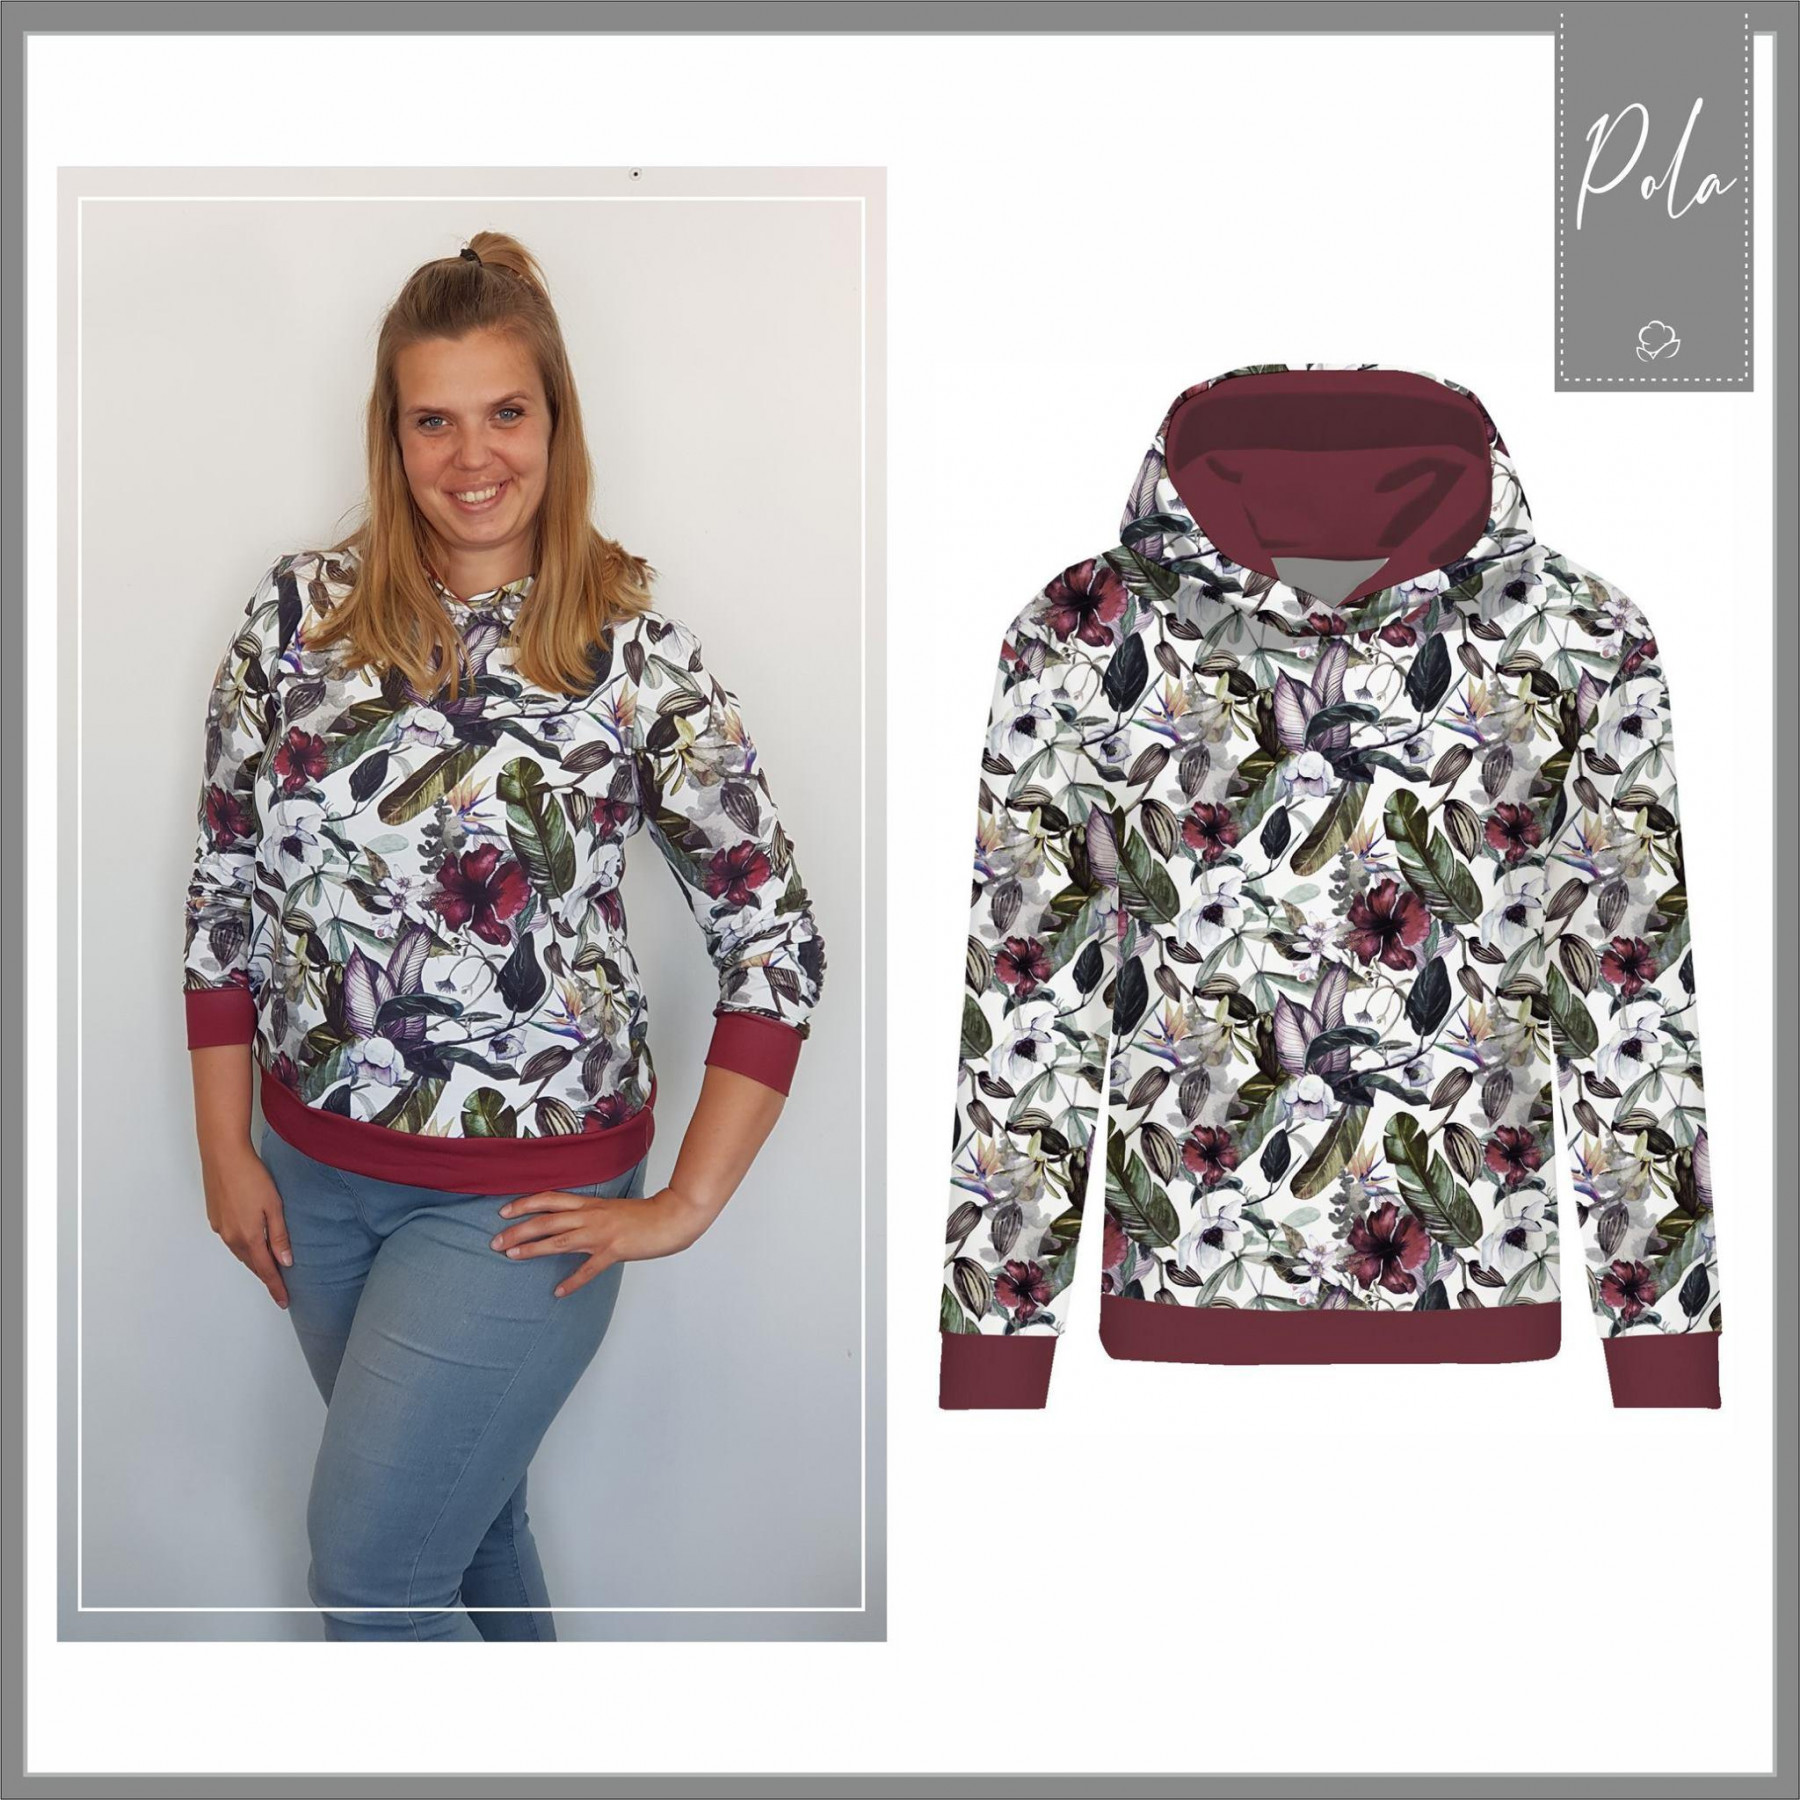 CLASSIC WOMEN’S HOODIE (POLA) - MINI LEAVES AND INSECTS PAT. 1 (TROPICAL NATURE) / white - looped knit fabric 